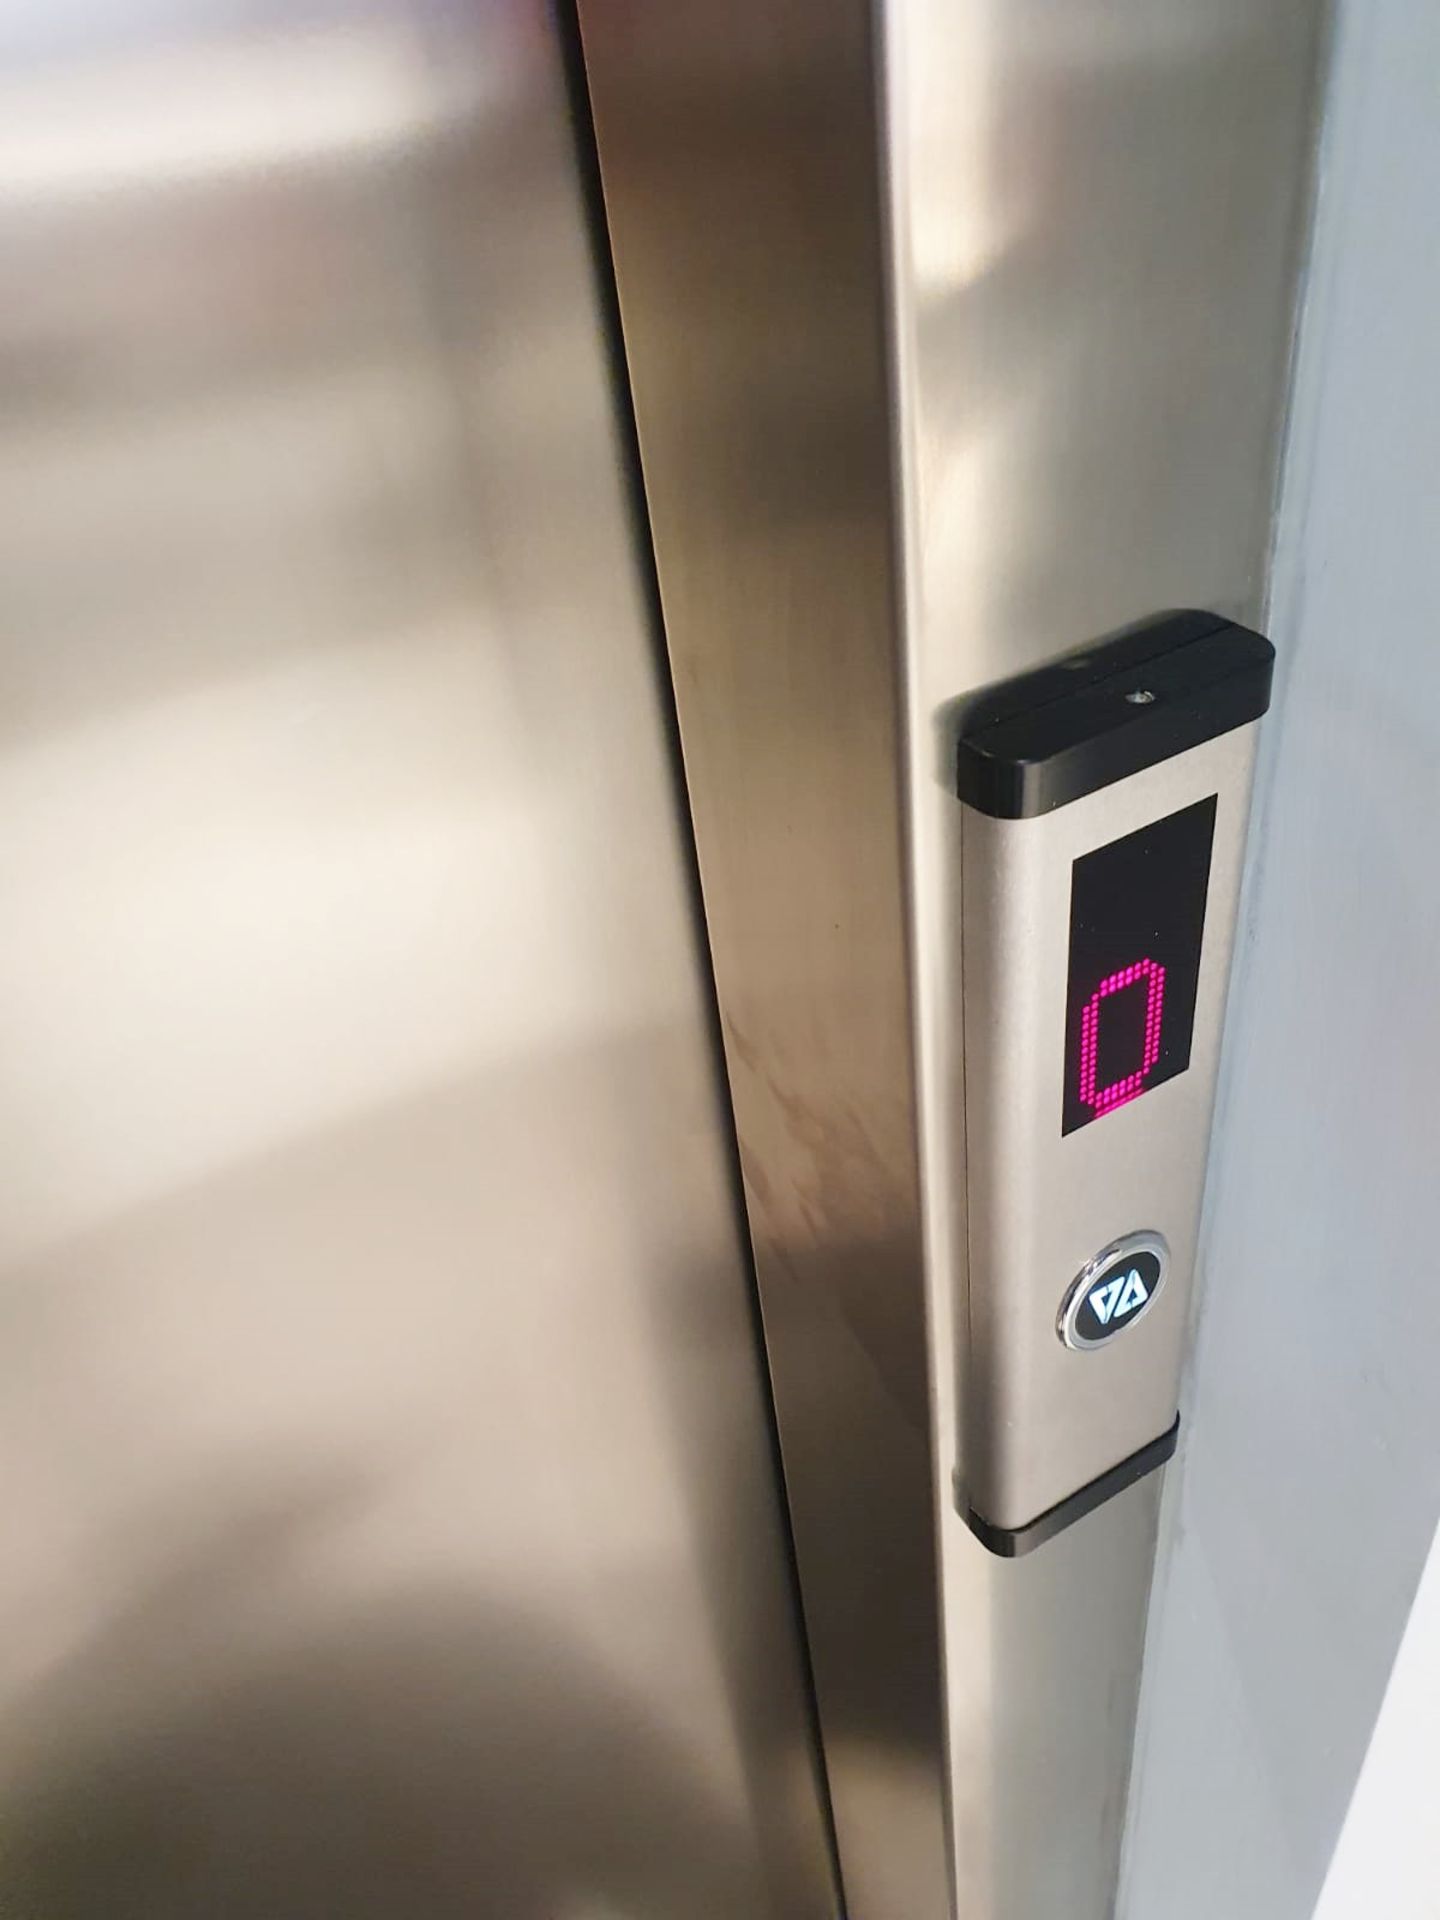 1 x Stannah Elevator Lift - Max Capacity 5 People / 400kg - Internal Dimensions H200 x W110 x D140 - Image 6 of 13